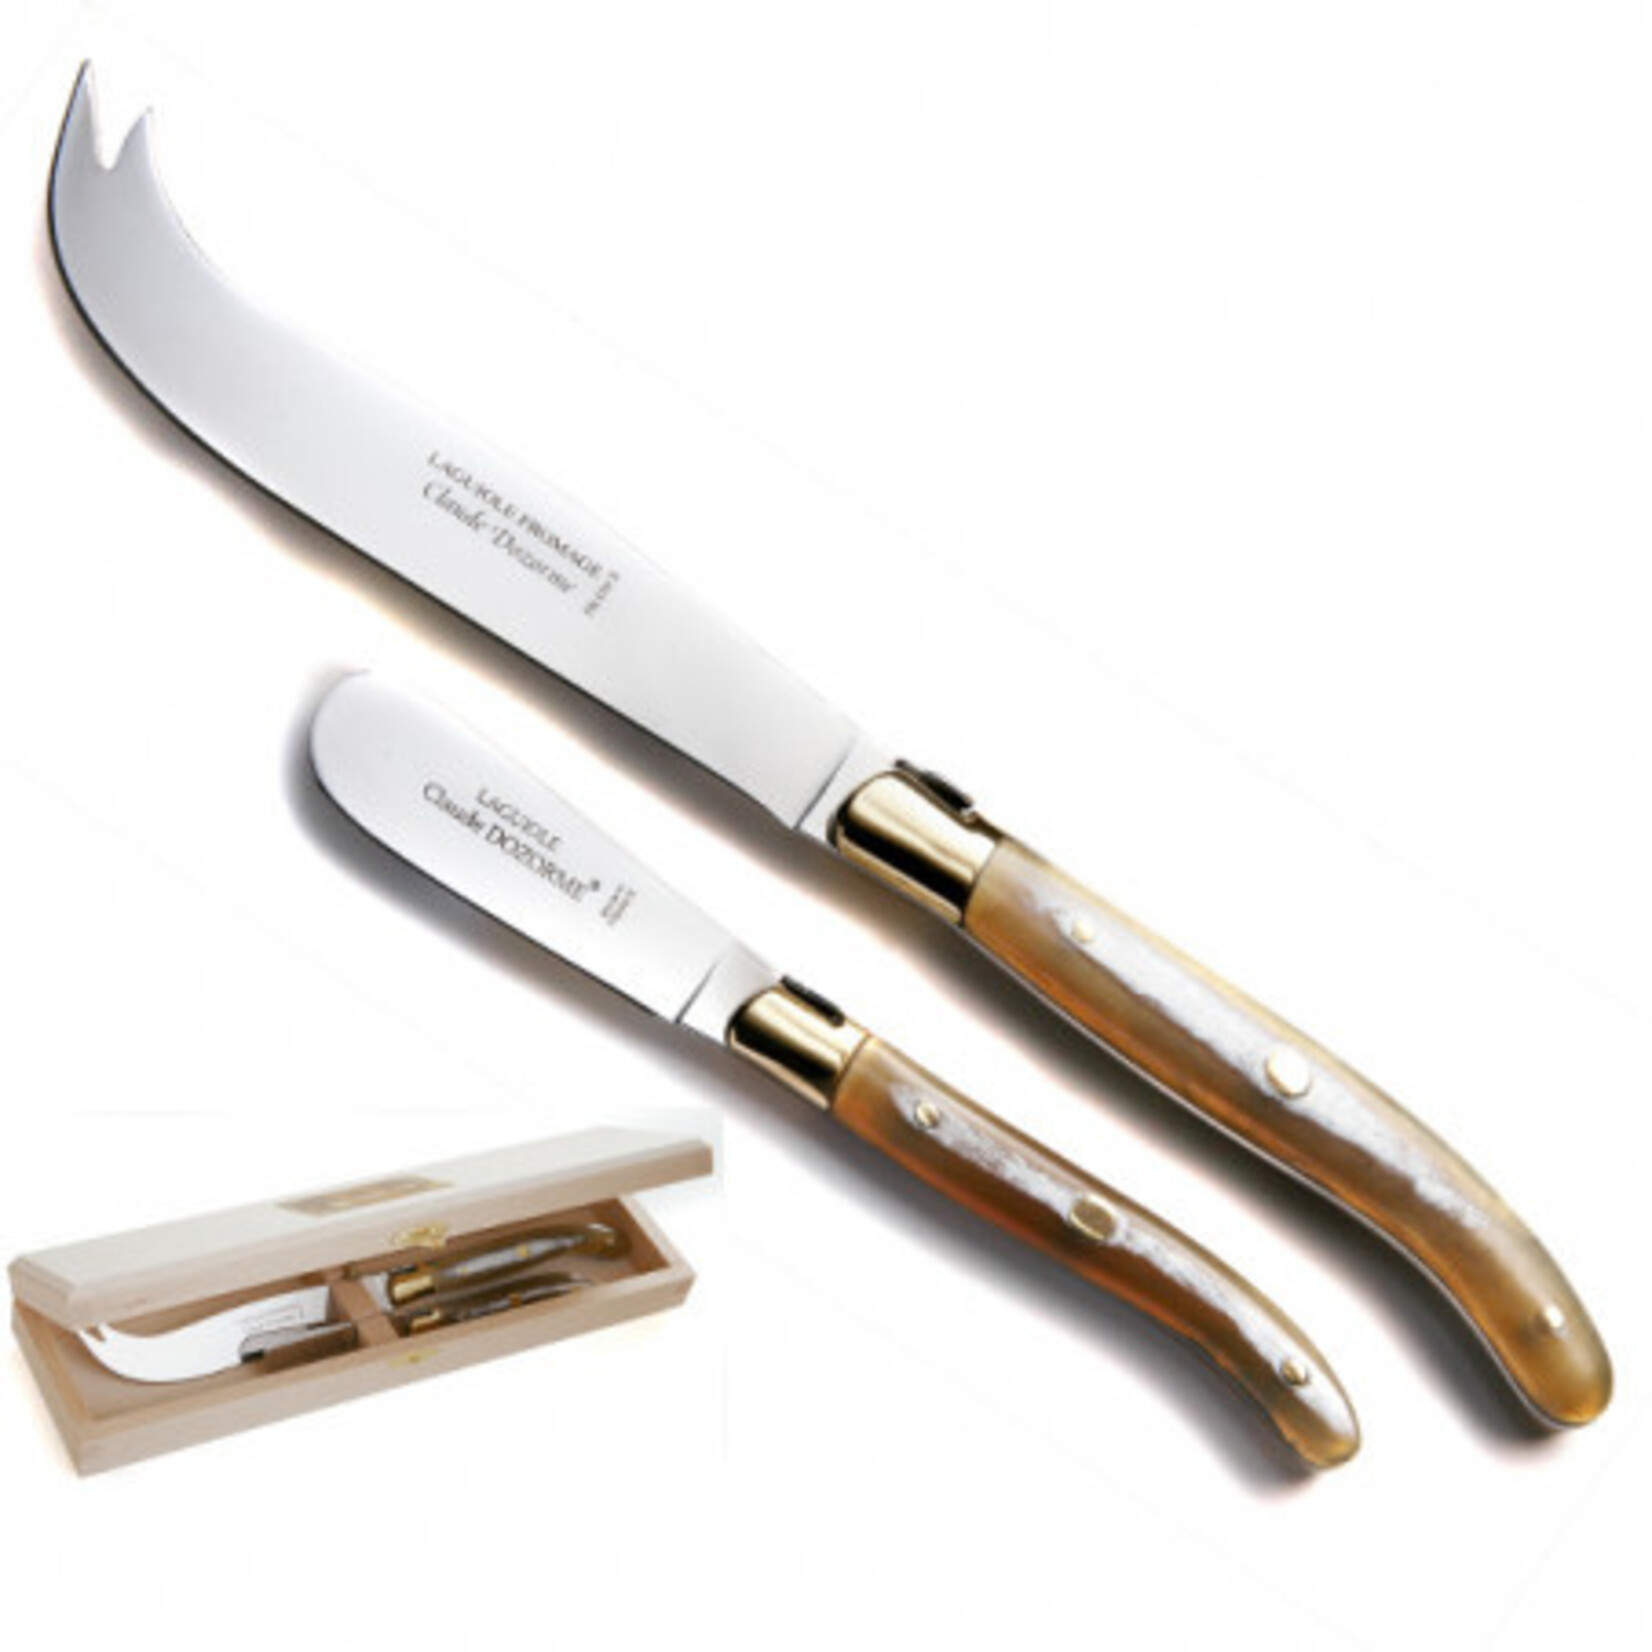 Brummel Cheese Knives by texxture | zillymonkey